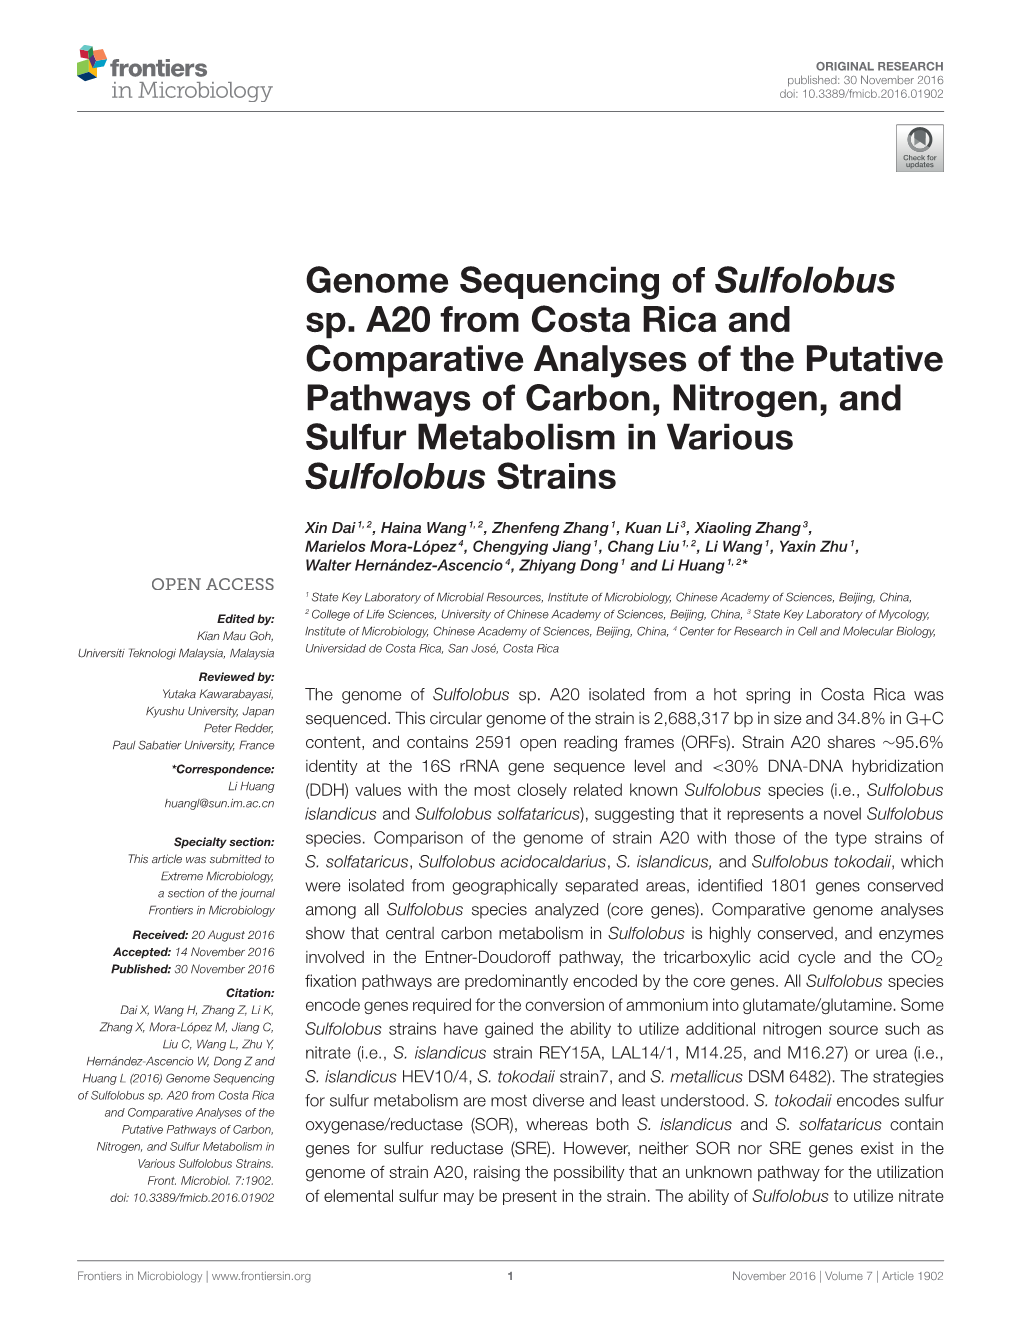 Genome Sequencing of Sulfolobus Sp. A20 from Costa Rica And